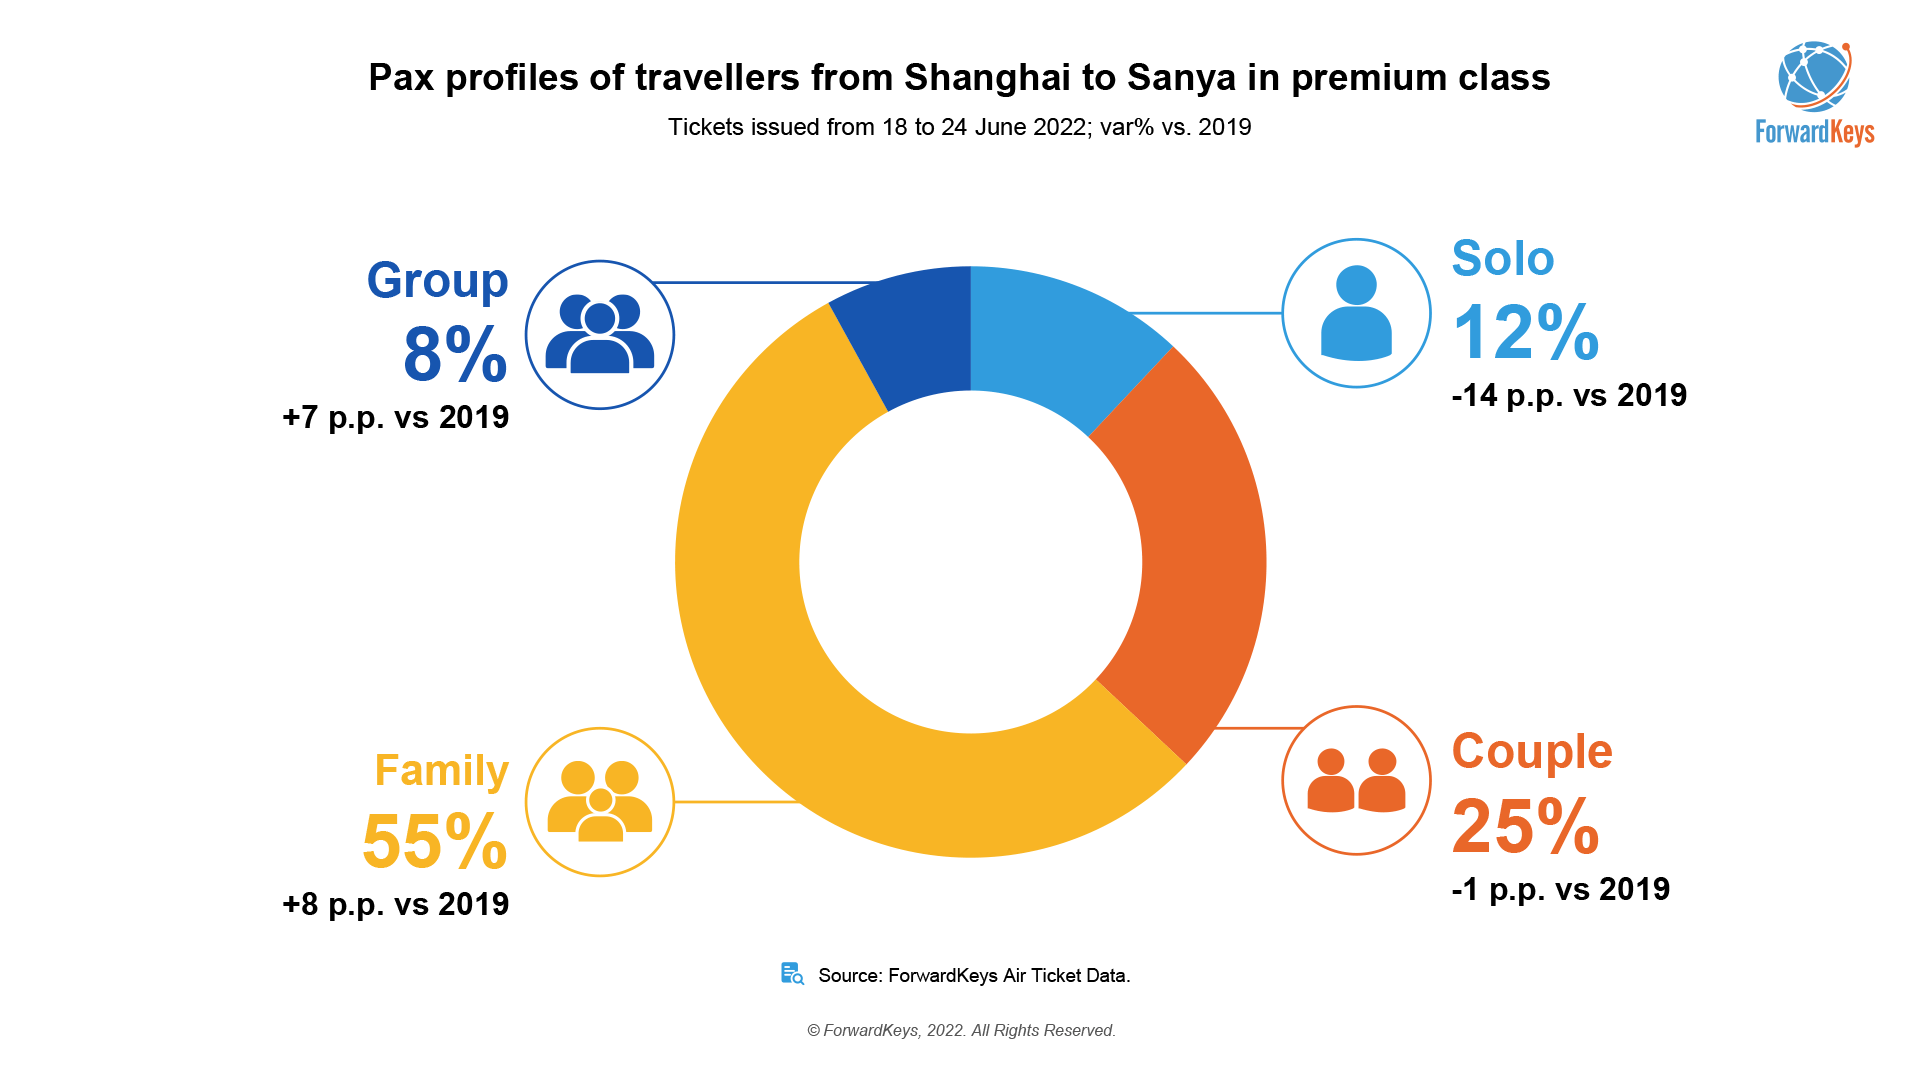 Pax profiles of travellers from Shanghai to Sanya in premium class